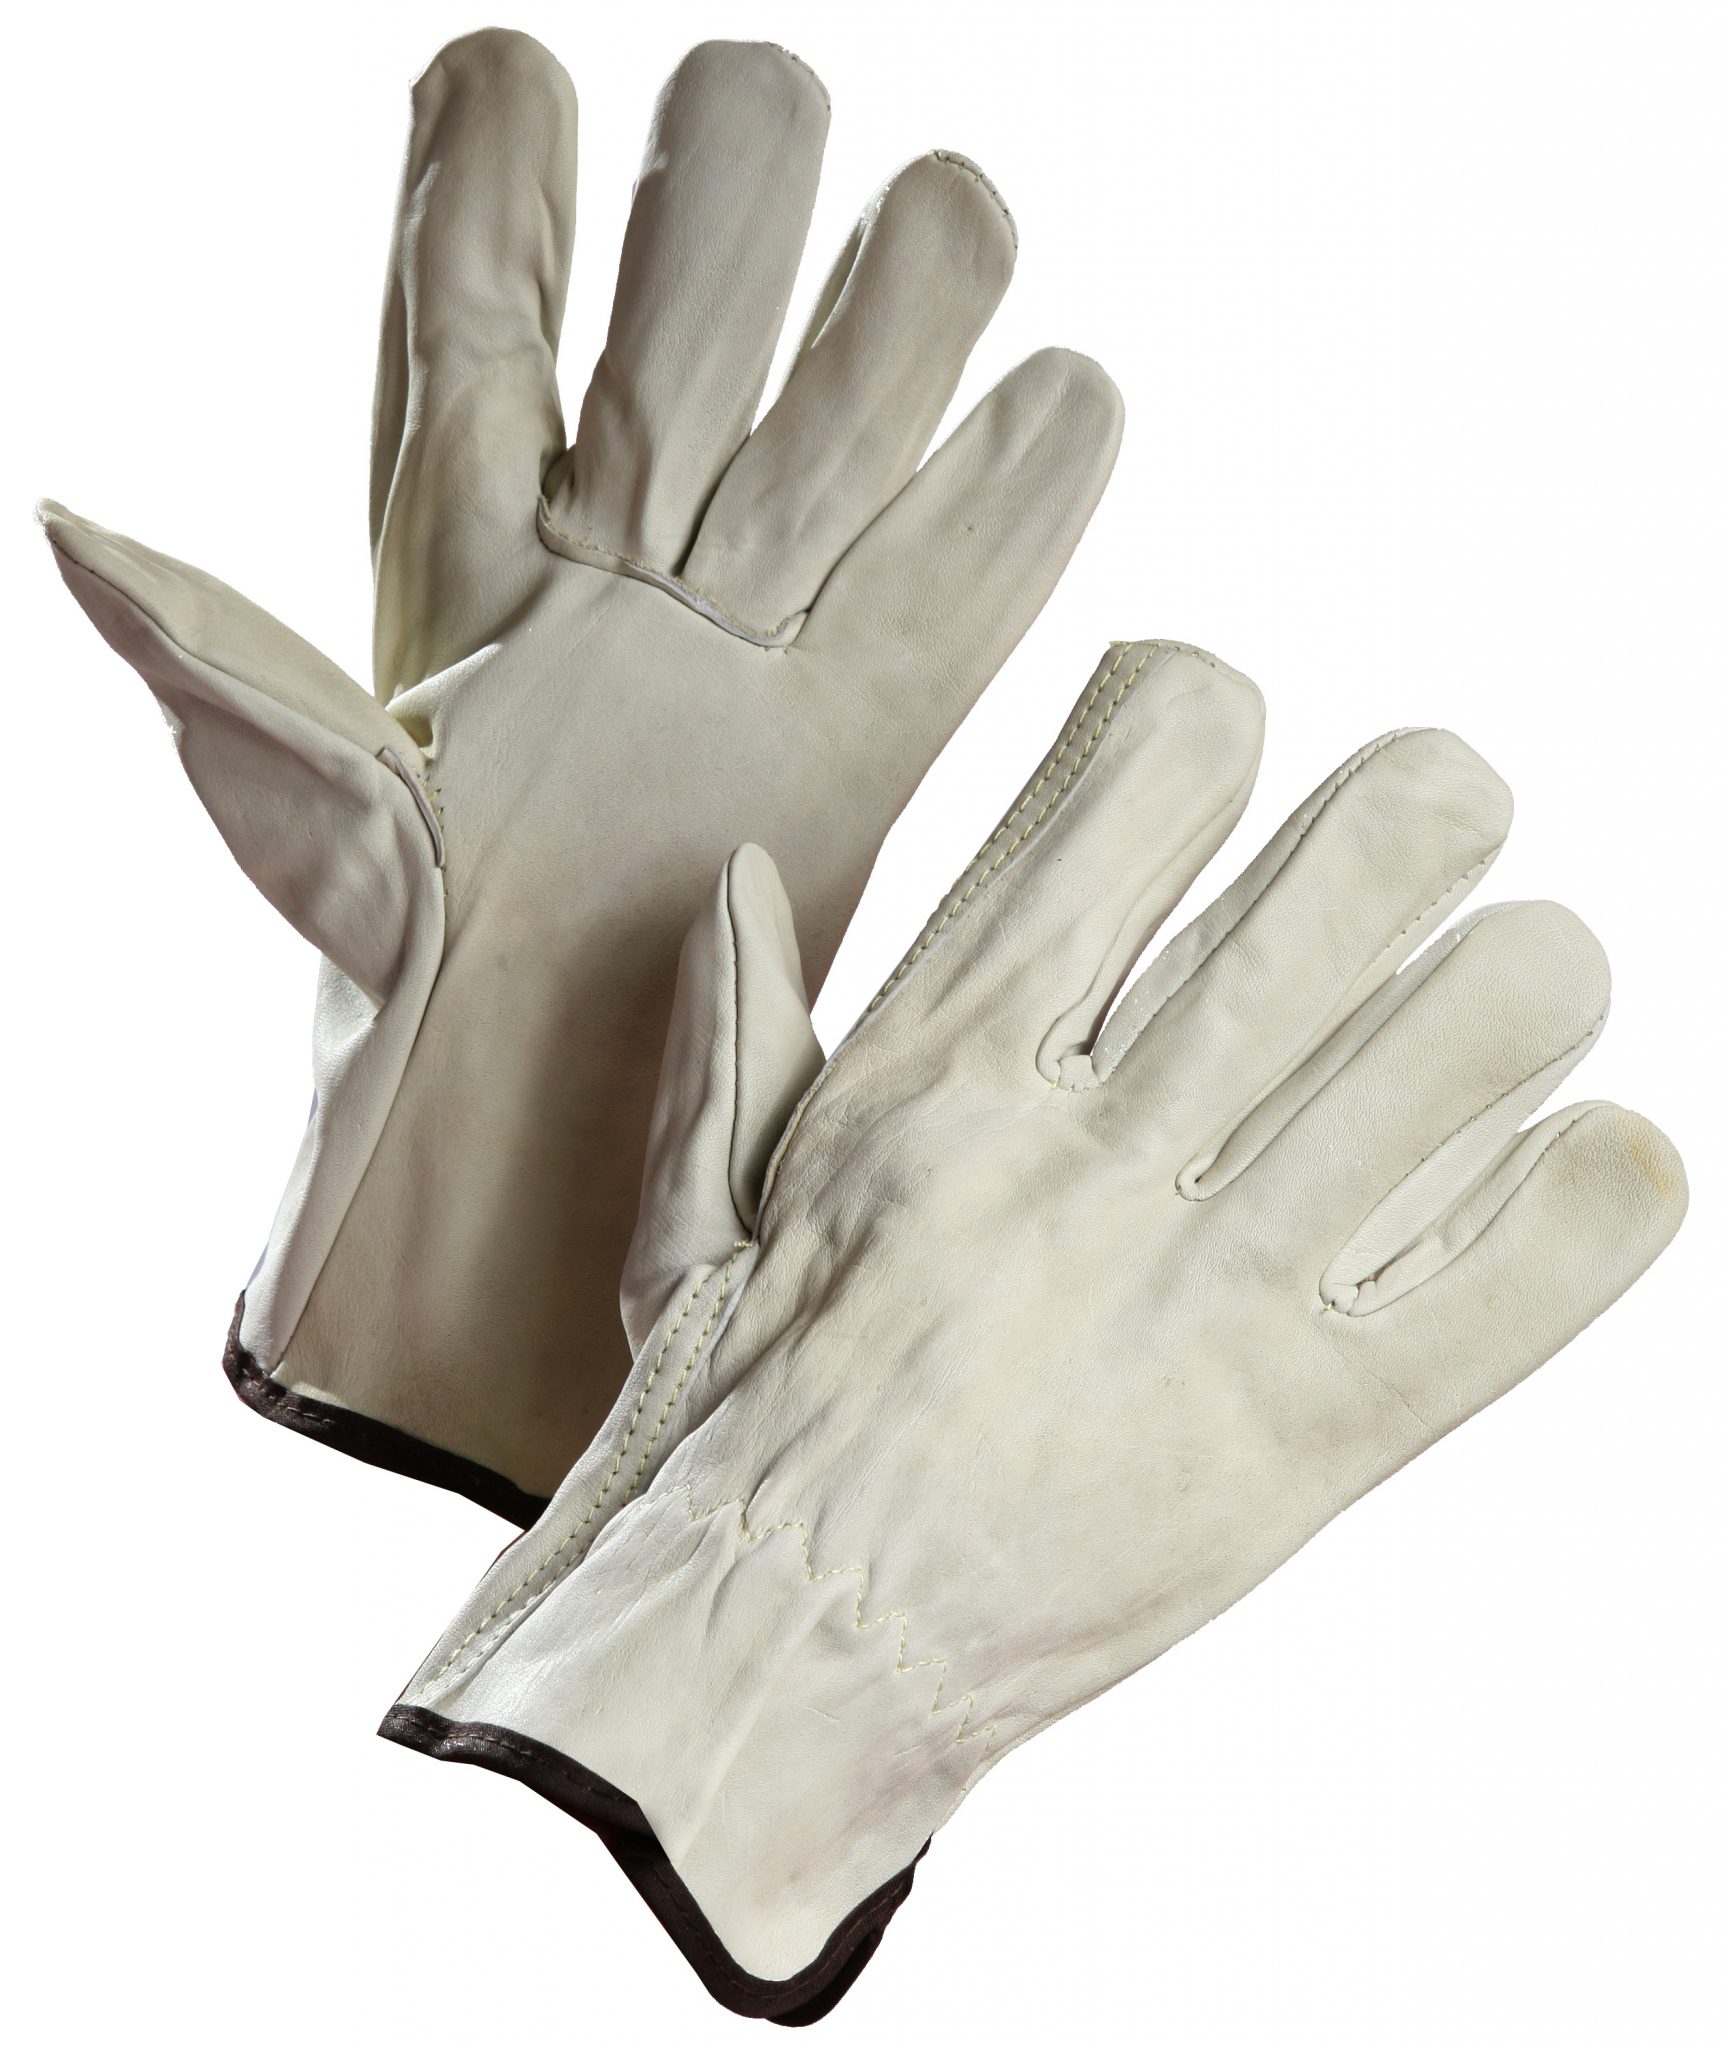 https://checkerscleaningsupply.com/wp-content/uploads/2018/12/1391_S3996%20LEATHER%20DRIVERS%20GLOVES.JPG